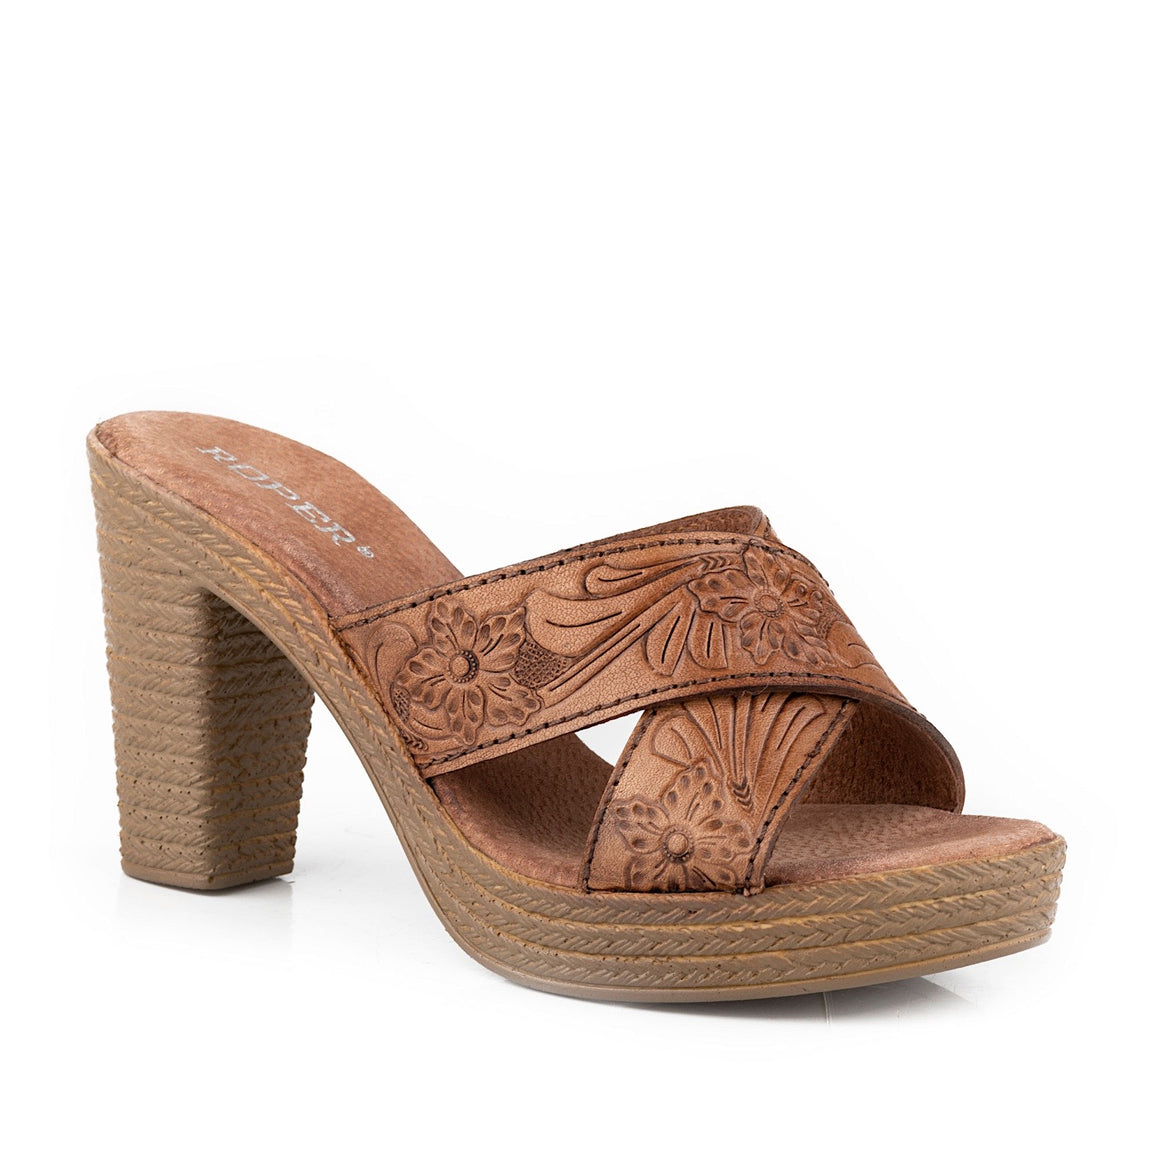 Roper Womens Mika Cross Strap -Tan Tooled Leather